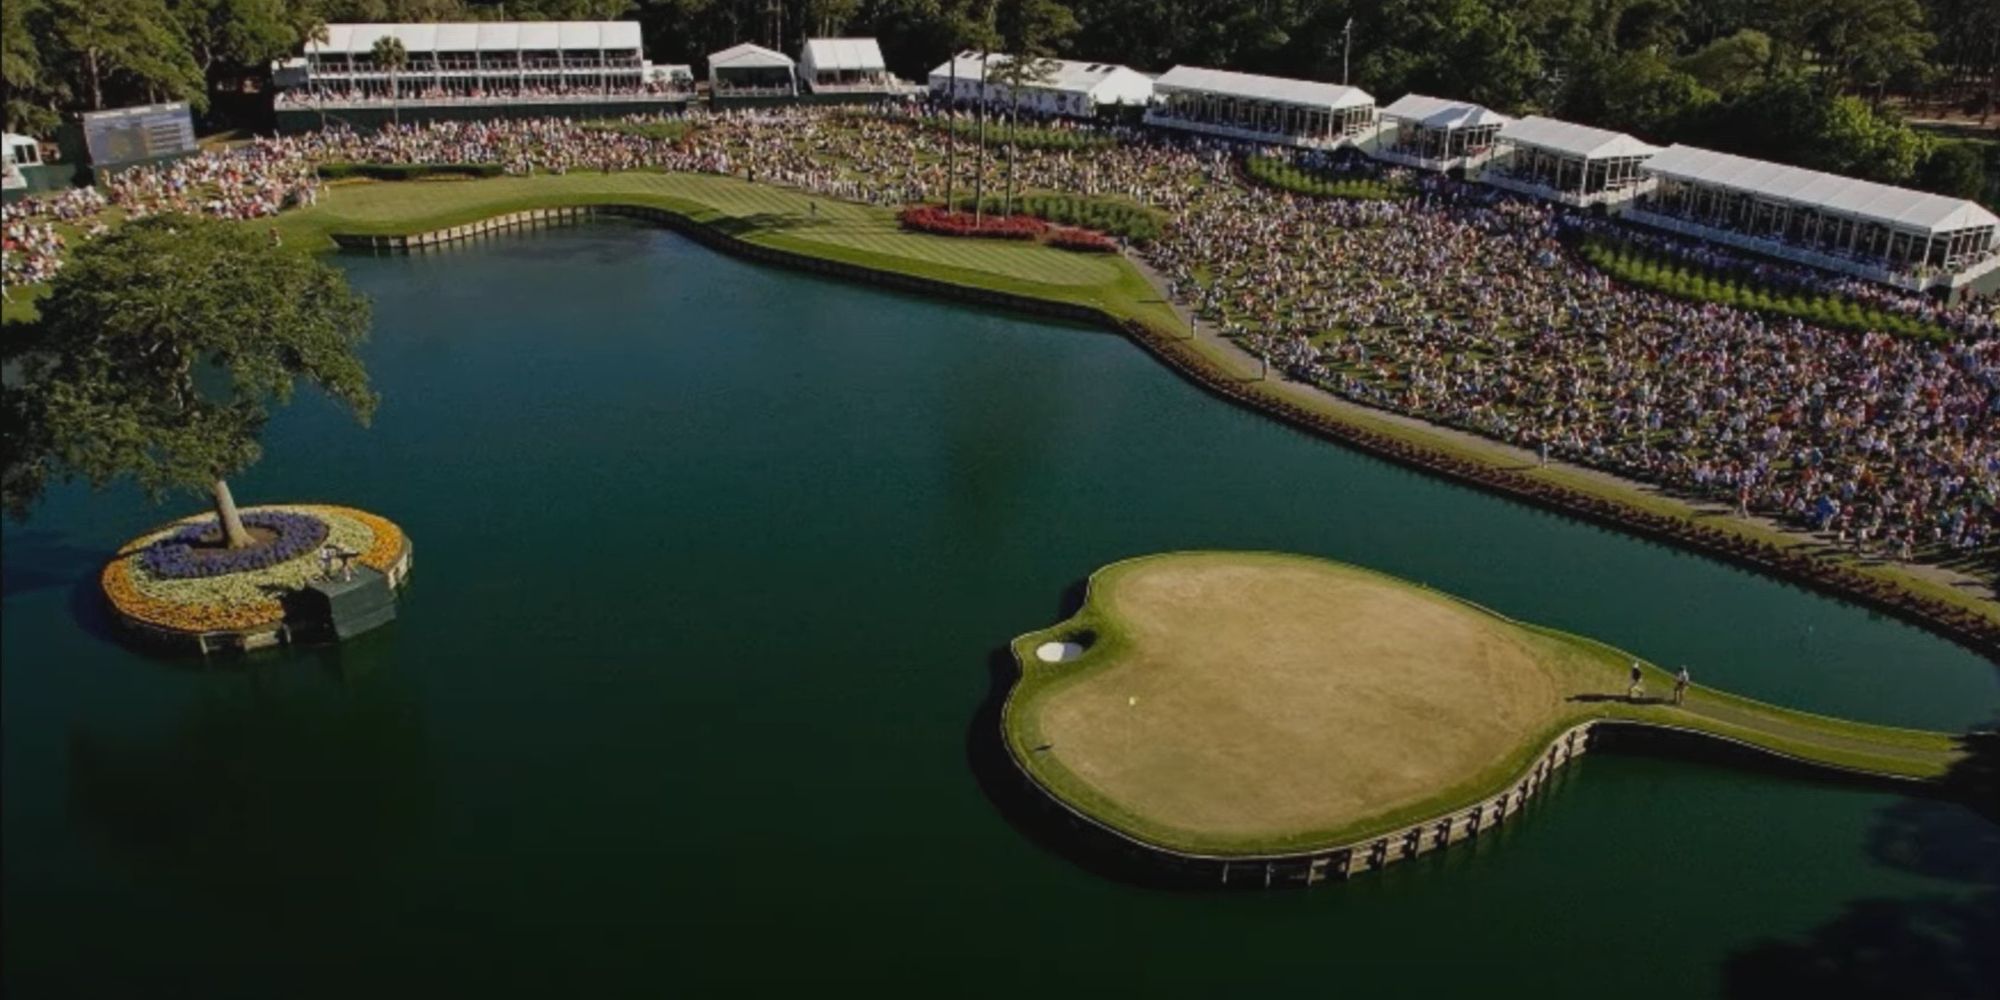 The famous "Island Green" hole from TPC Sawgrass in EA Sports PGA Tour